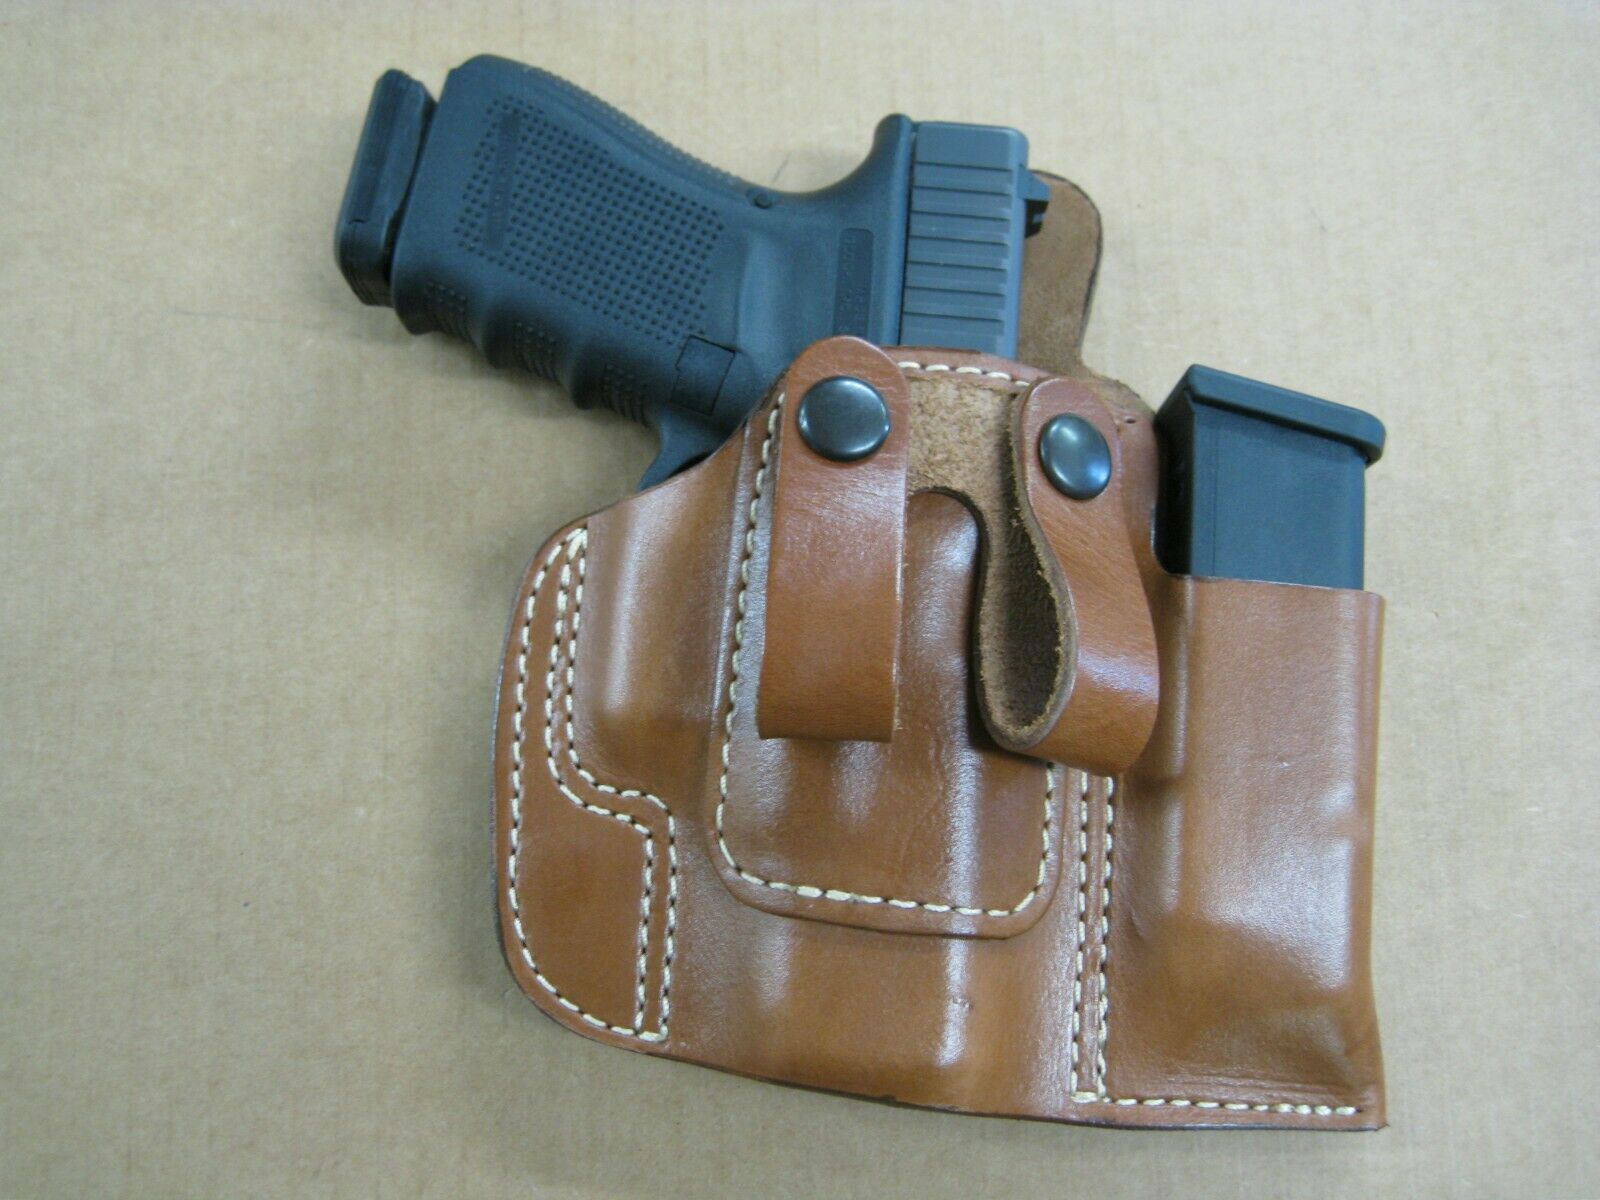 Browning Pro-9,Pro-40,9mm With 4 5/8" Barrel Gun holster With Magazine pouch